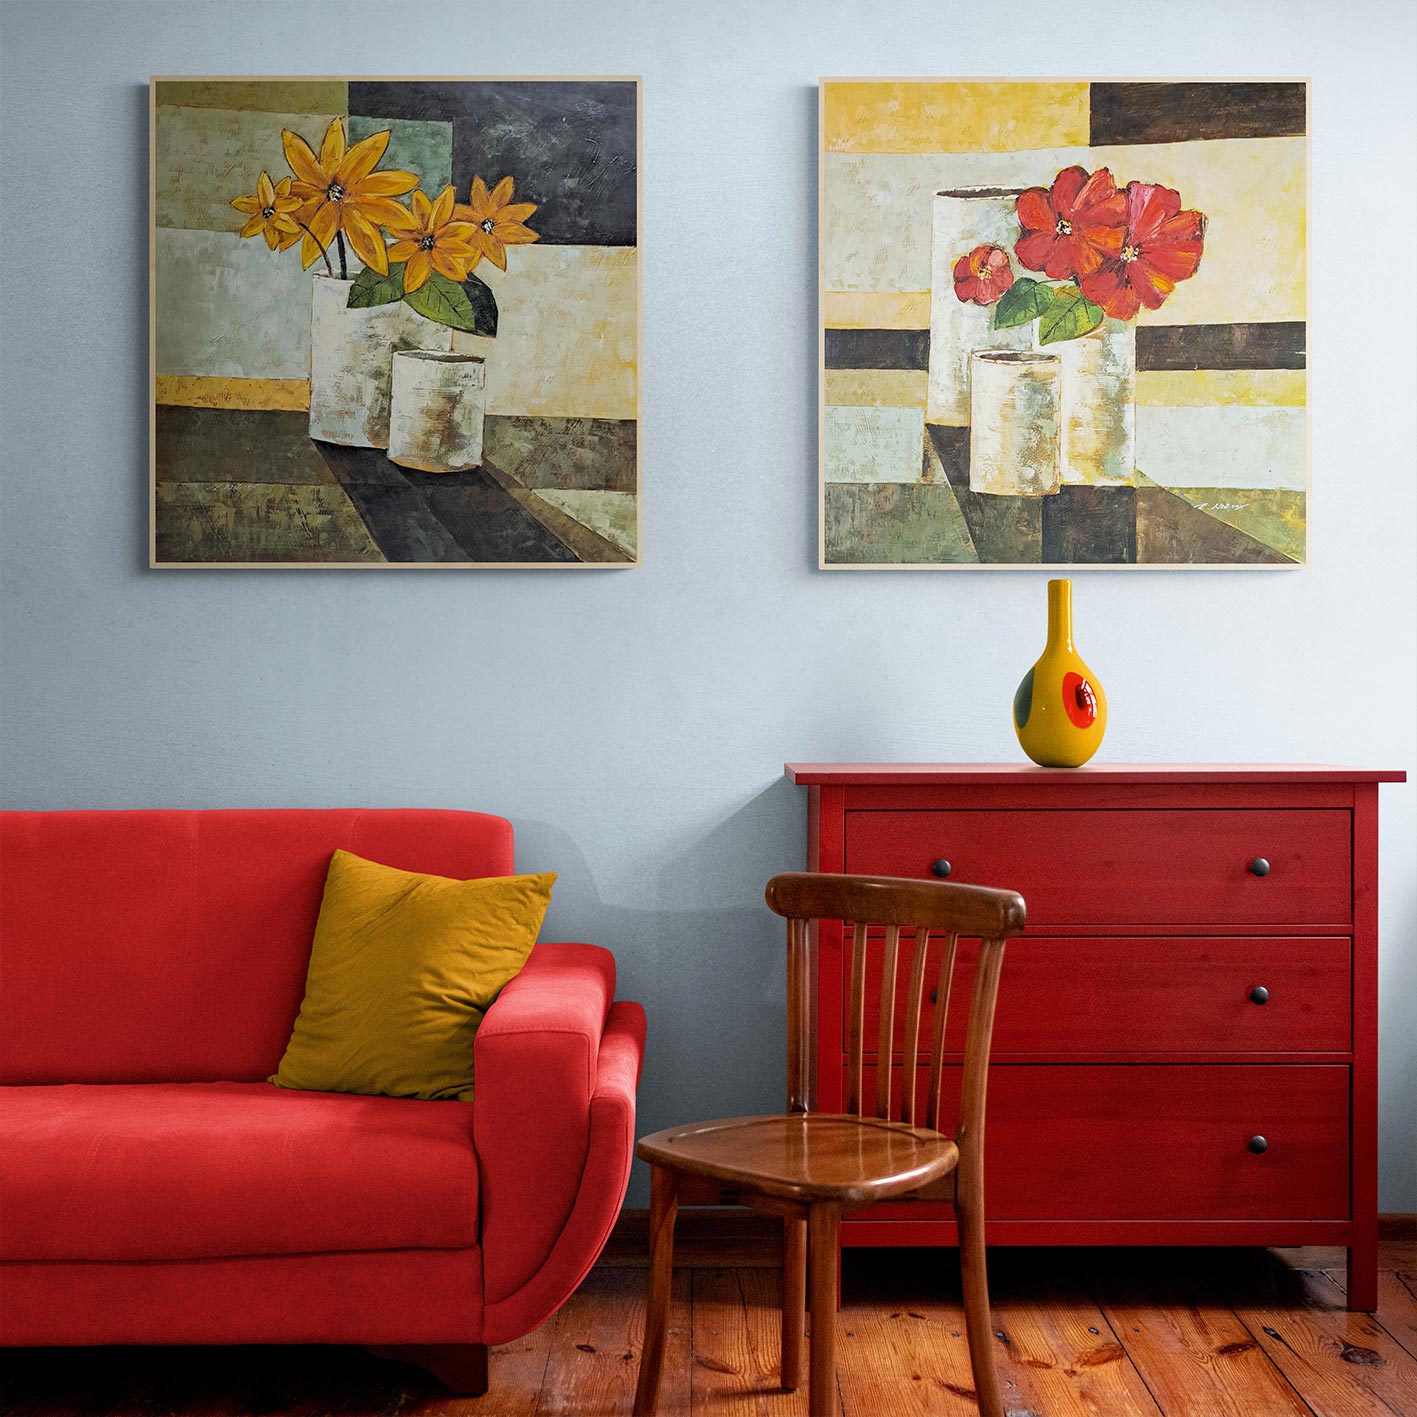 Intense Flowers Diptych Painting 80x80 cm [2 pieces]